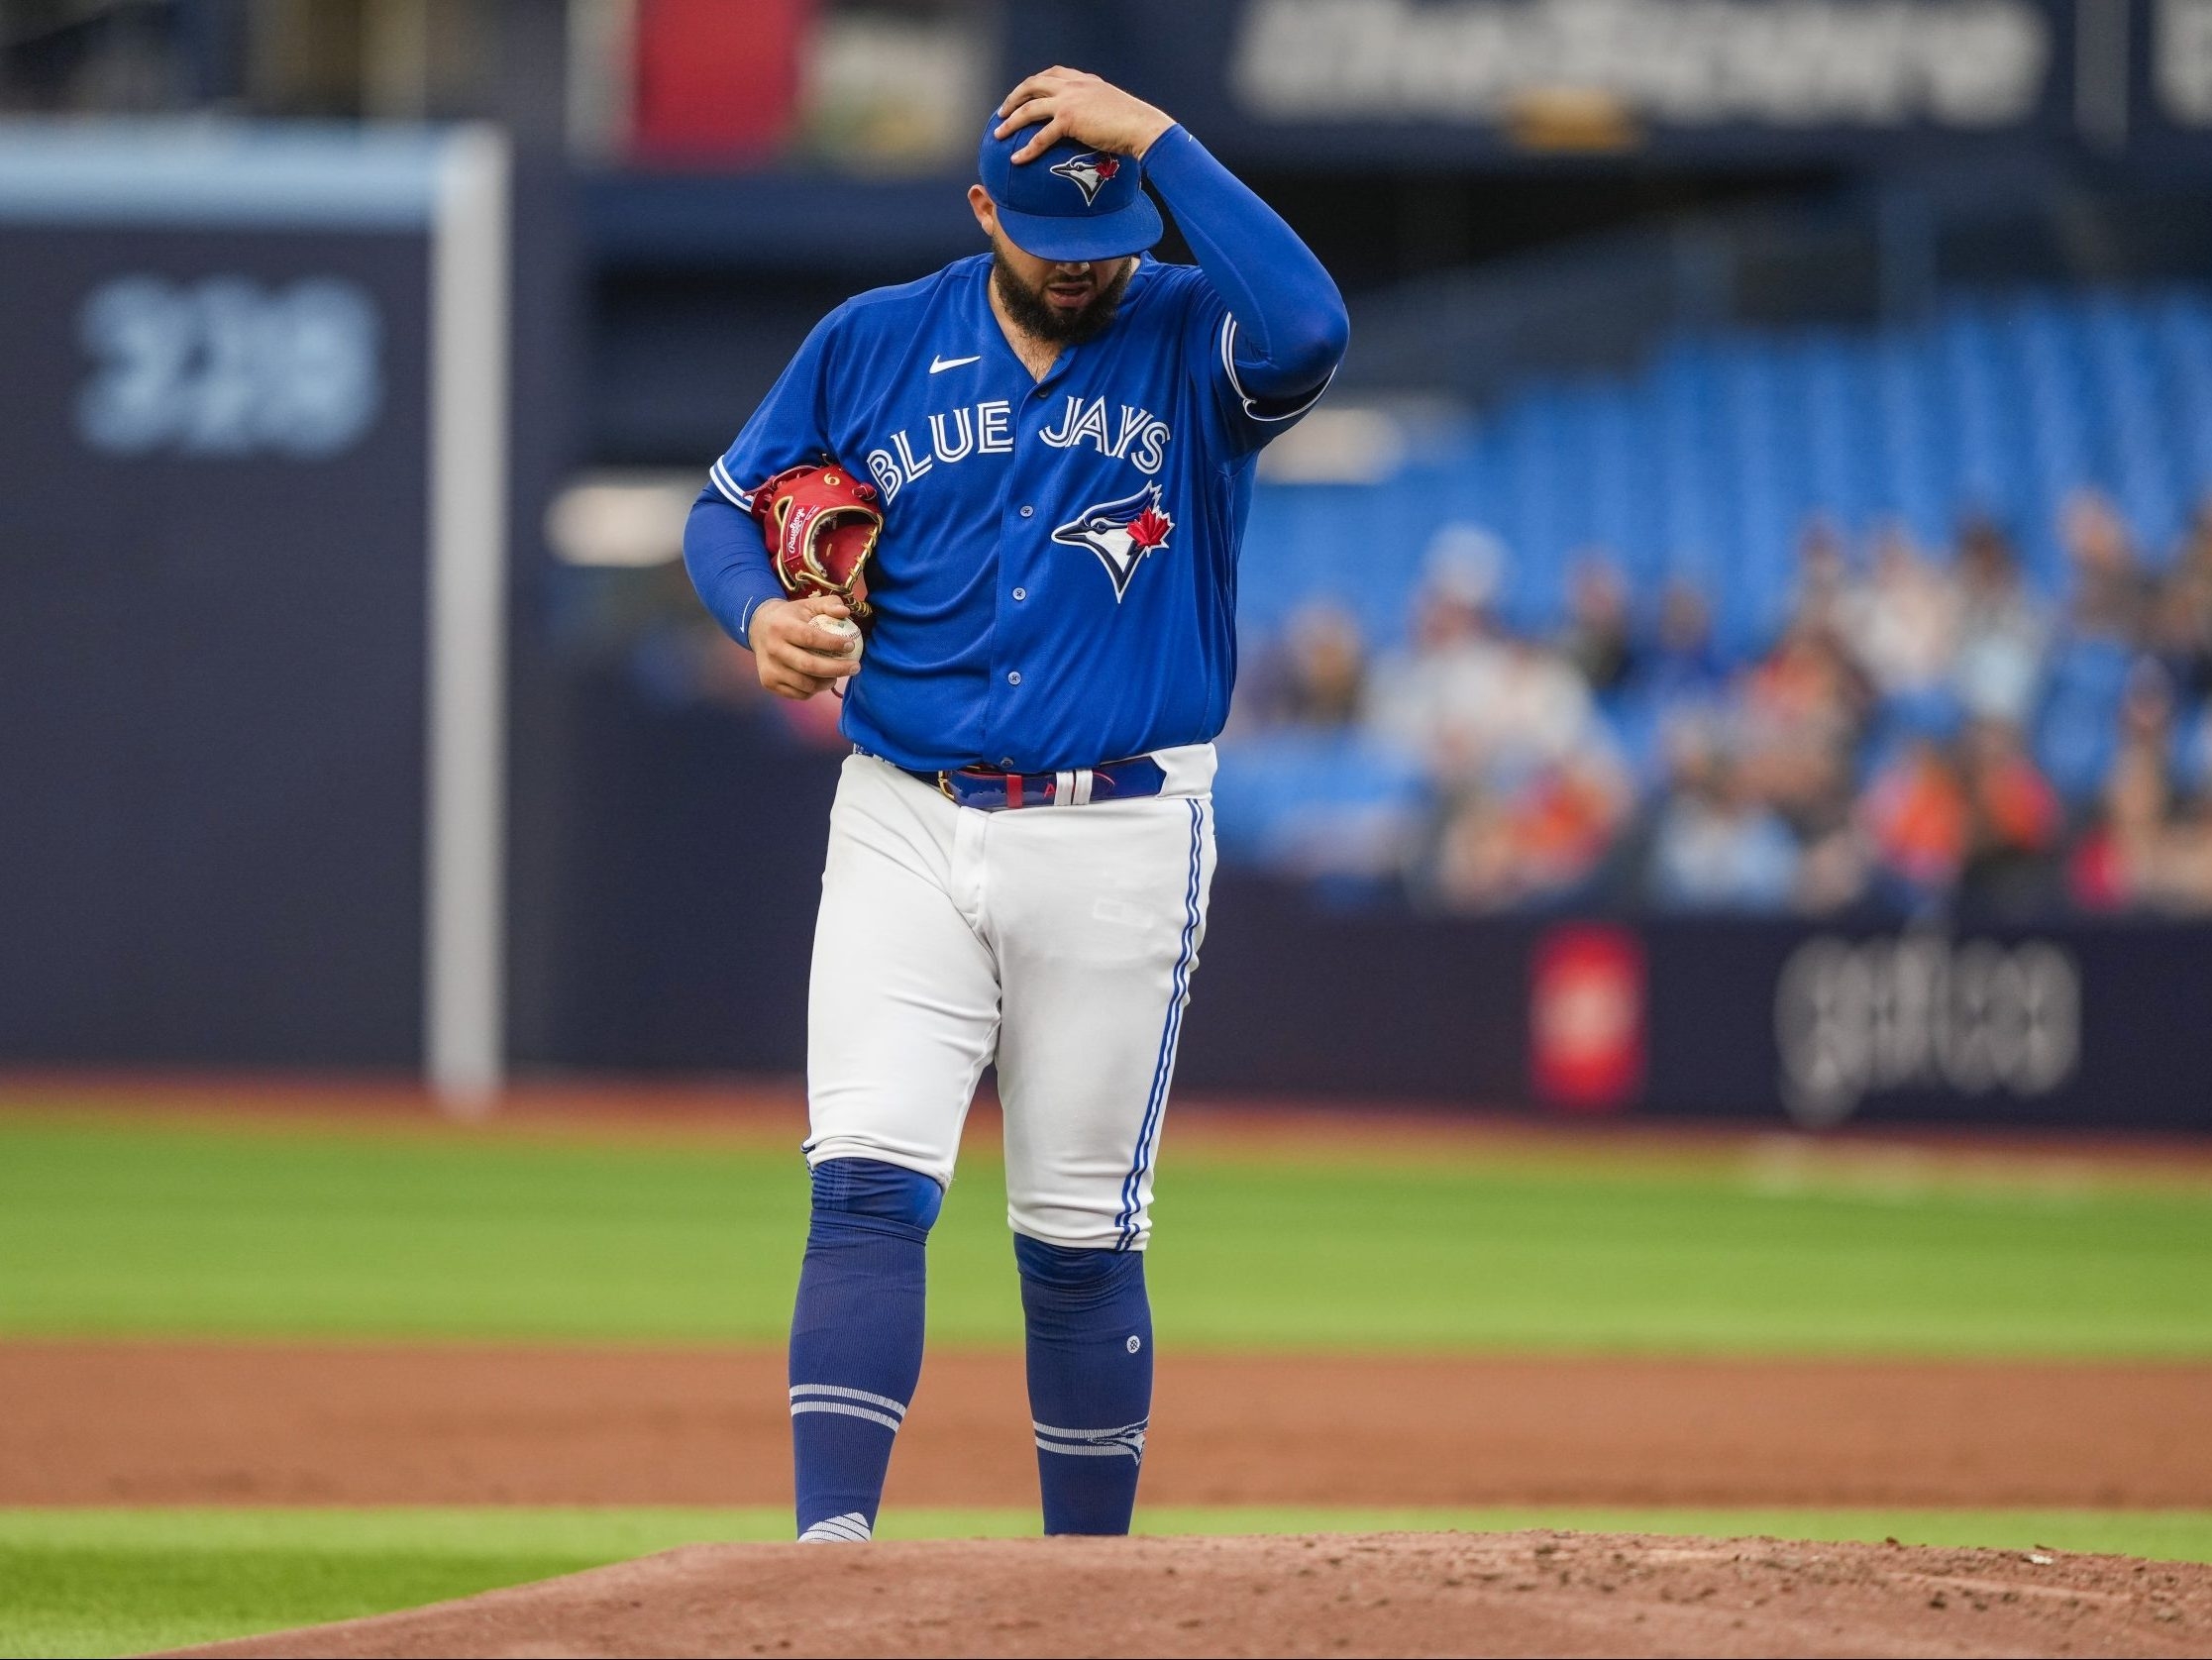 To the Blue Jays fans who booed Alek Manoah: He deserved better